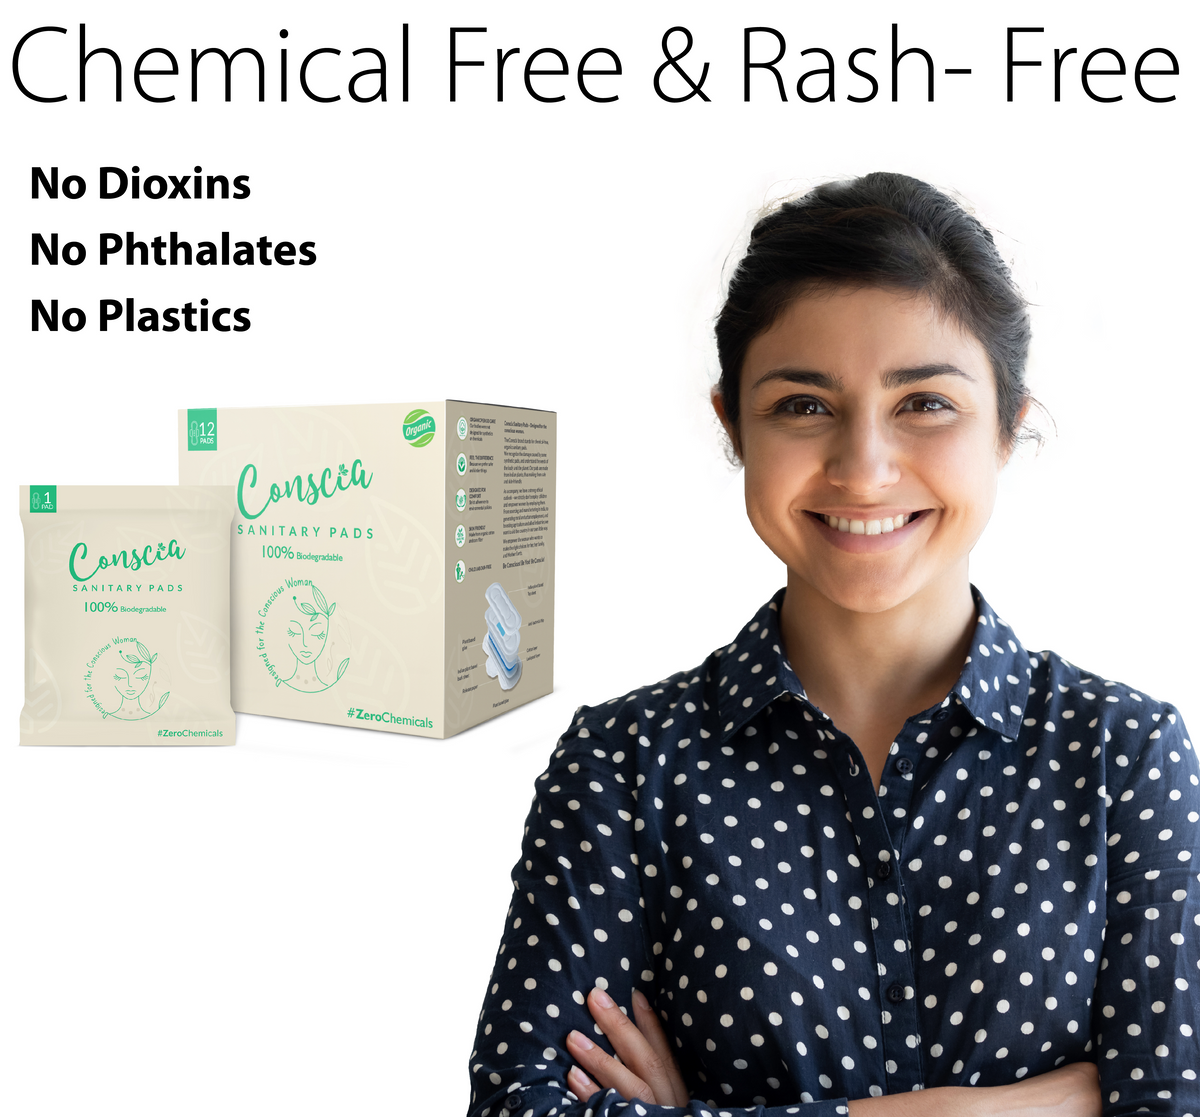 Conscia Chemical Free Sanitary Pads | Pack of 12 XL Pads